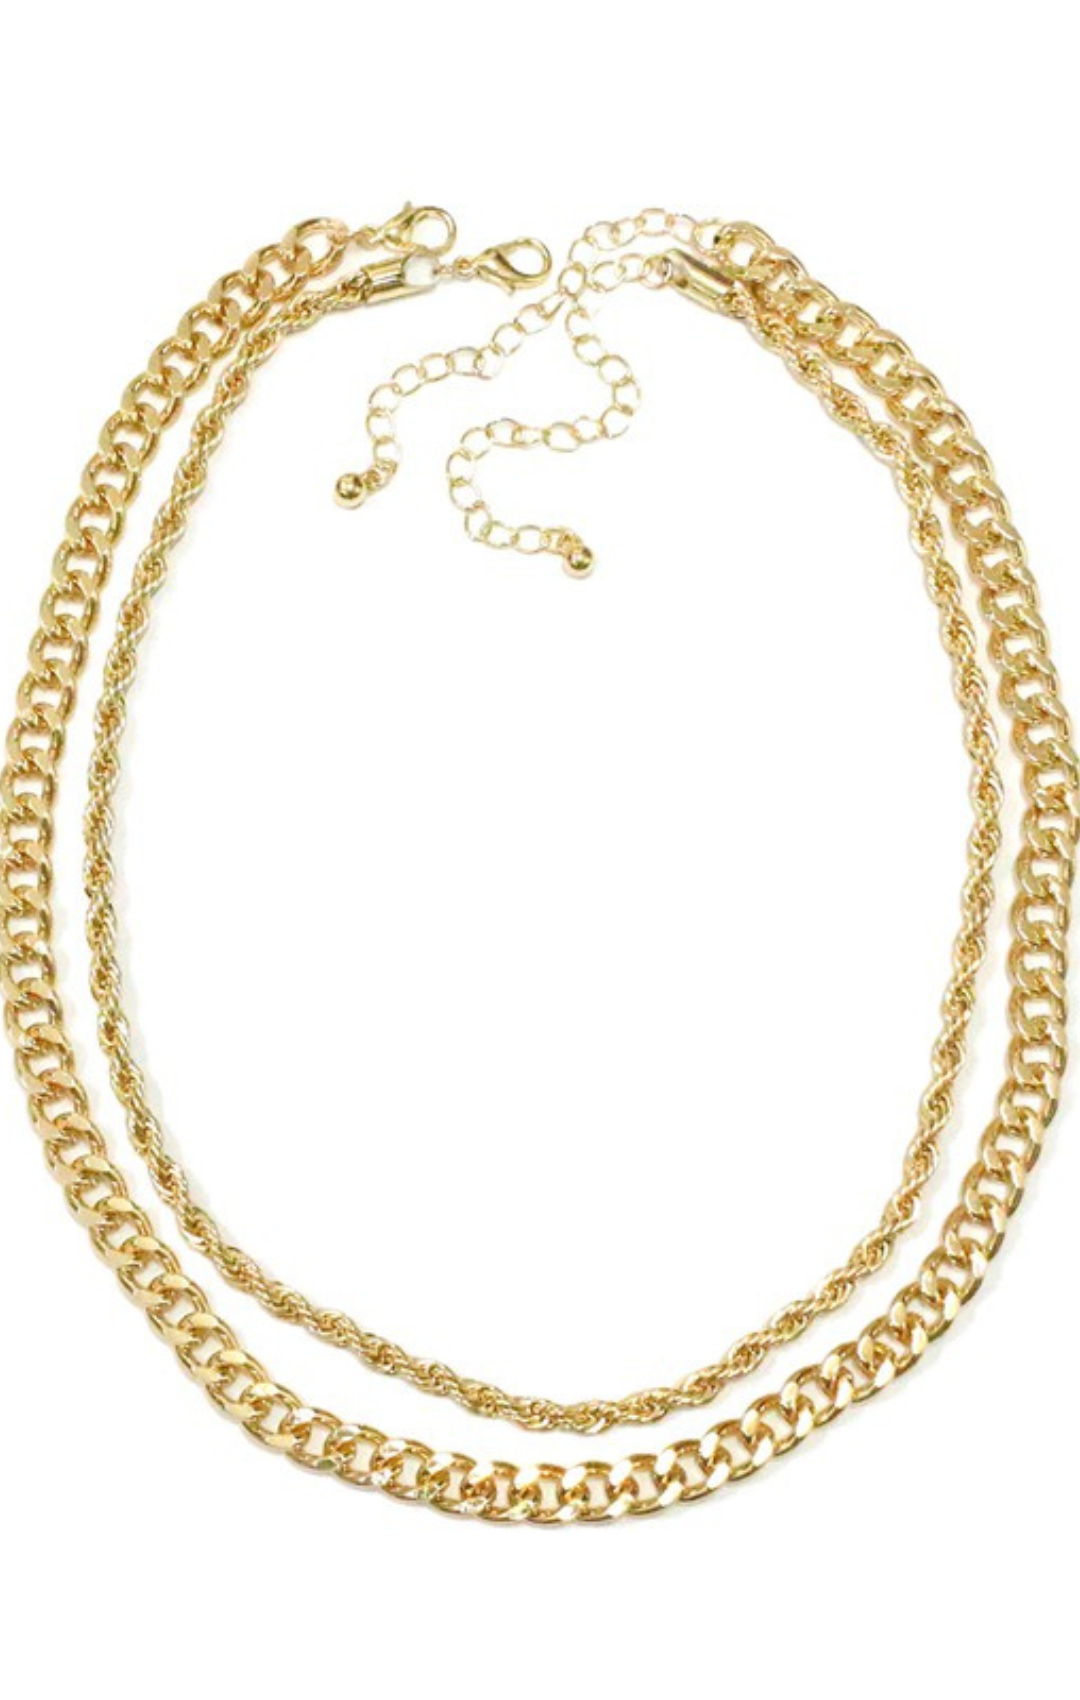 Twist and Chain Necklace